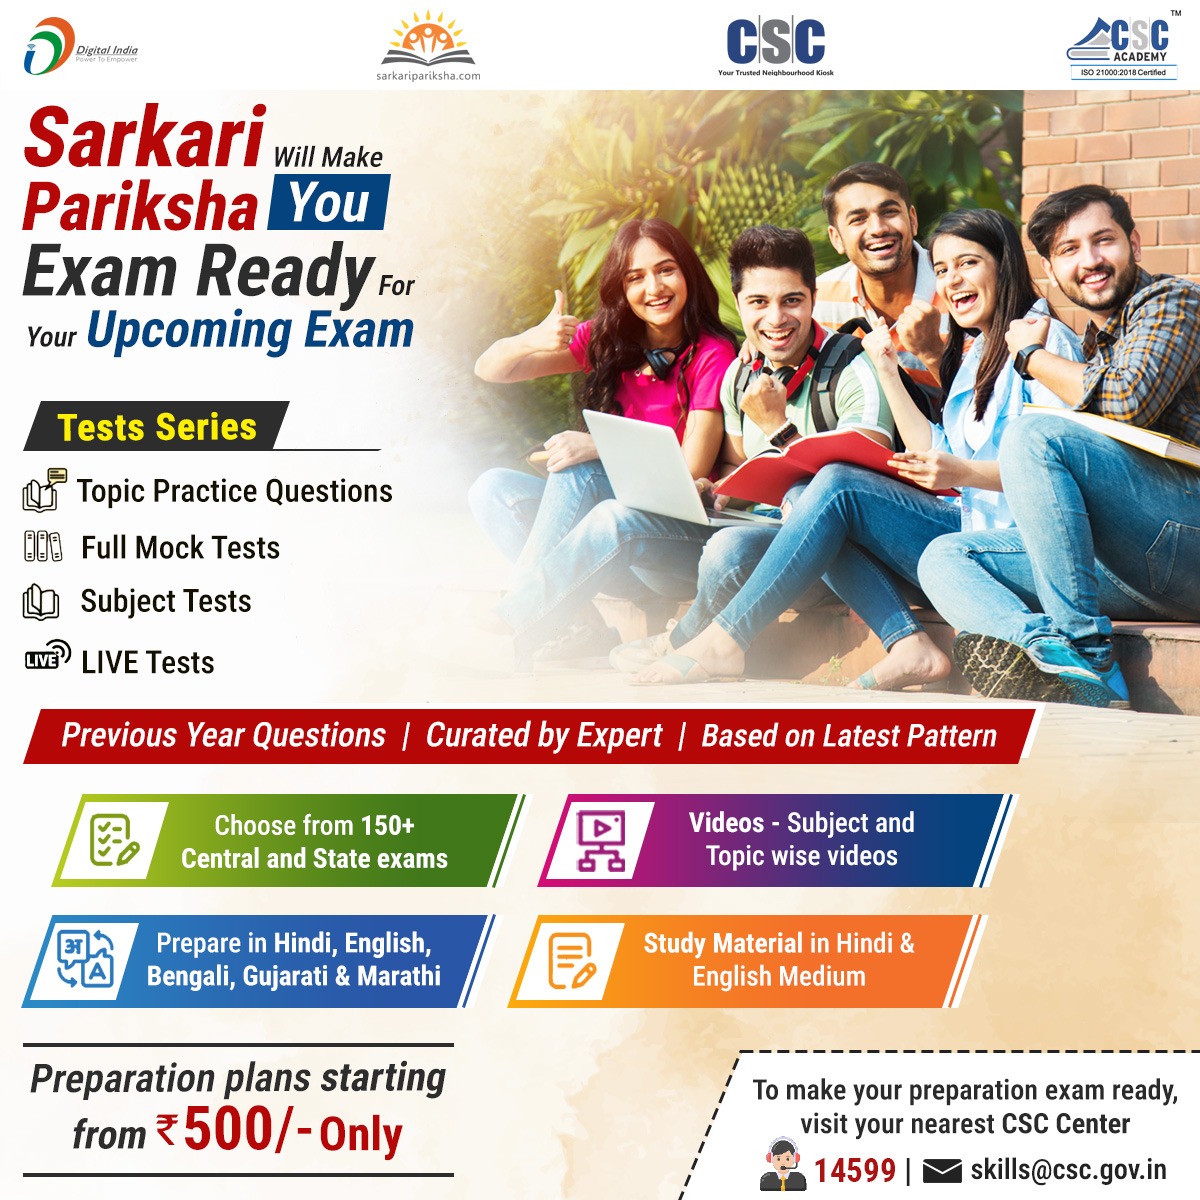 Opt for #CSCSarkariPariksha and get fully prepared for State and Central exams, starting at just ₹500! Choose from 150+ exams & prepare in 5 different languages. For info, watch our Sarkari Pariksha Par Charcha session at bit.ly/SarkariPariksh… or mail us at skills@csc.gov.in